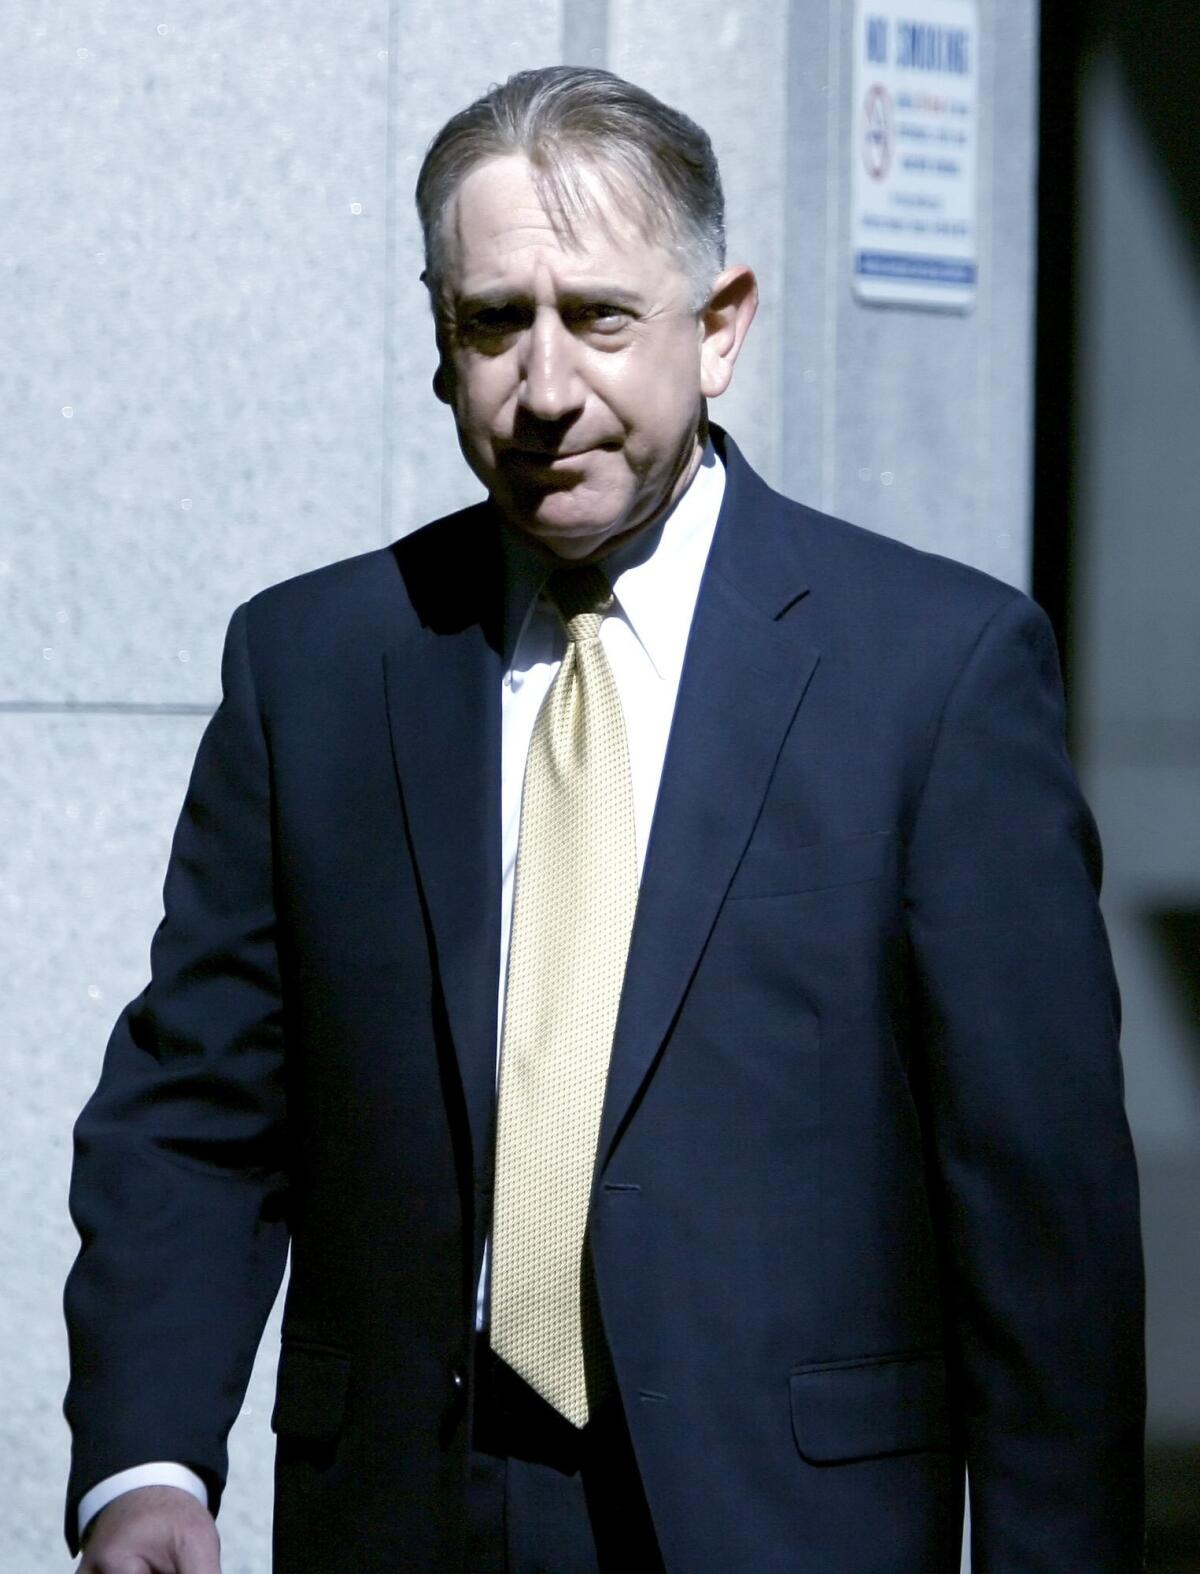 Former Glendale city councilmember John Drayman arrives at the C. S. Foltz Criminal Justice Center in Los Angeles to be arraigned on charges on Tuesday, May 8, 2012.